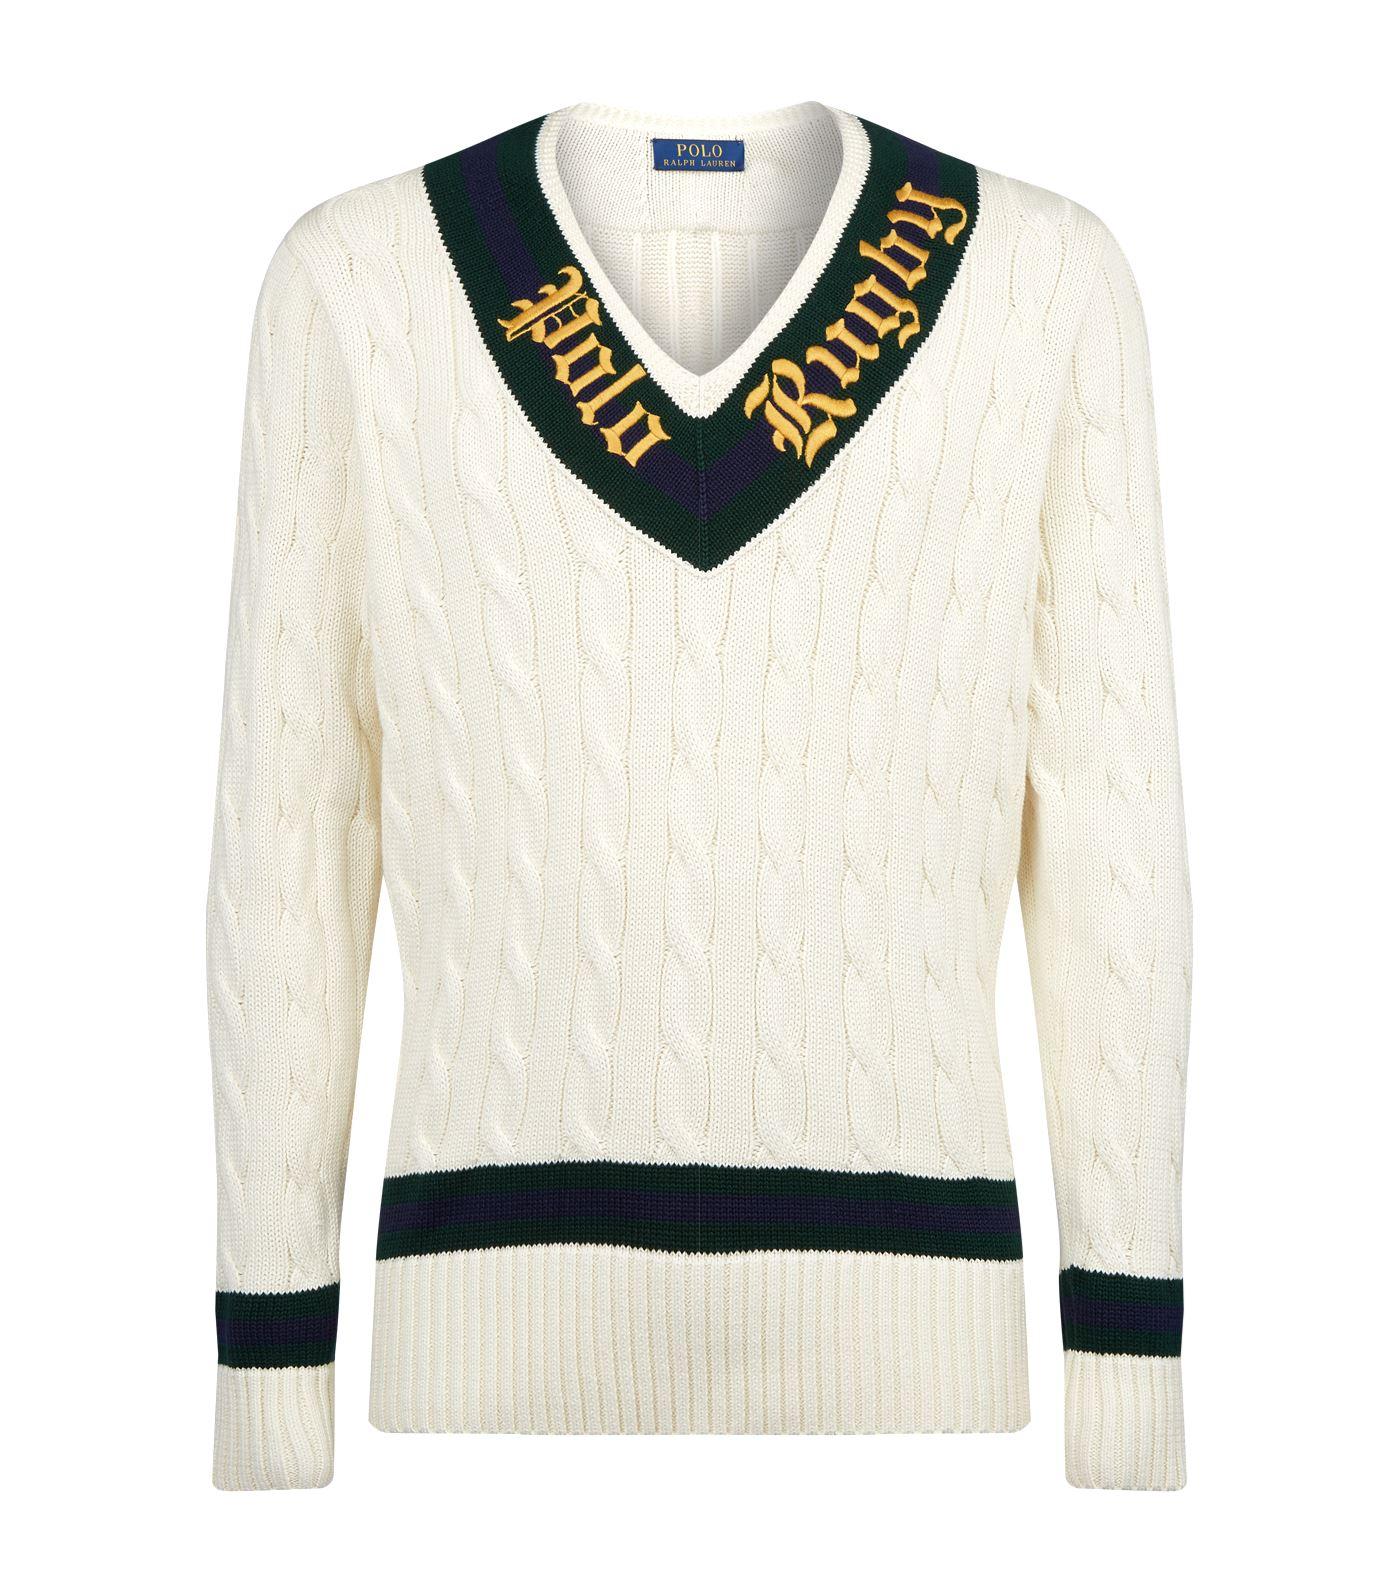 Polo Ralph Lauren Knitted Rugby Cricket Sweater in White for Men - Lyst